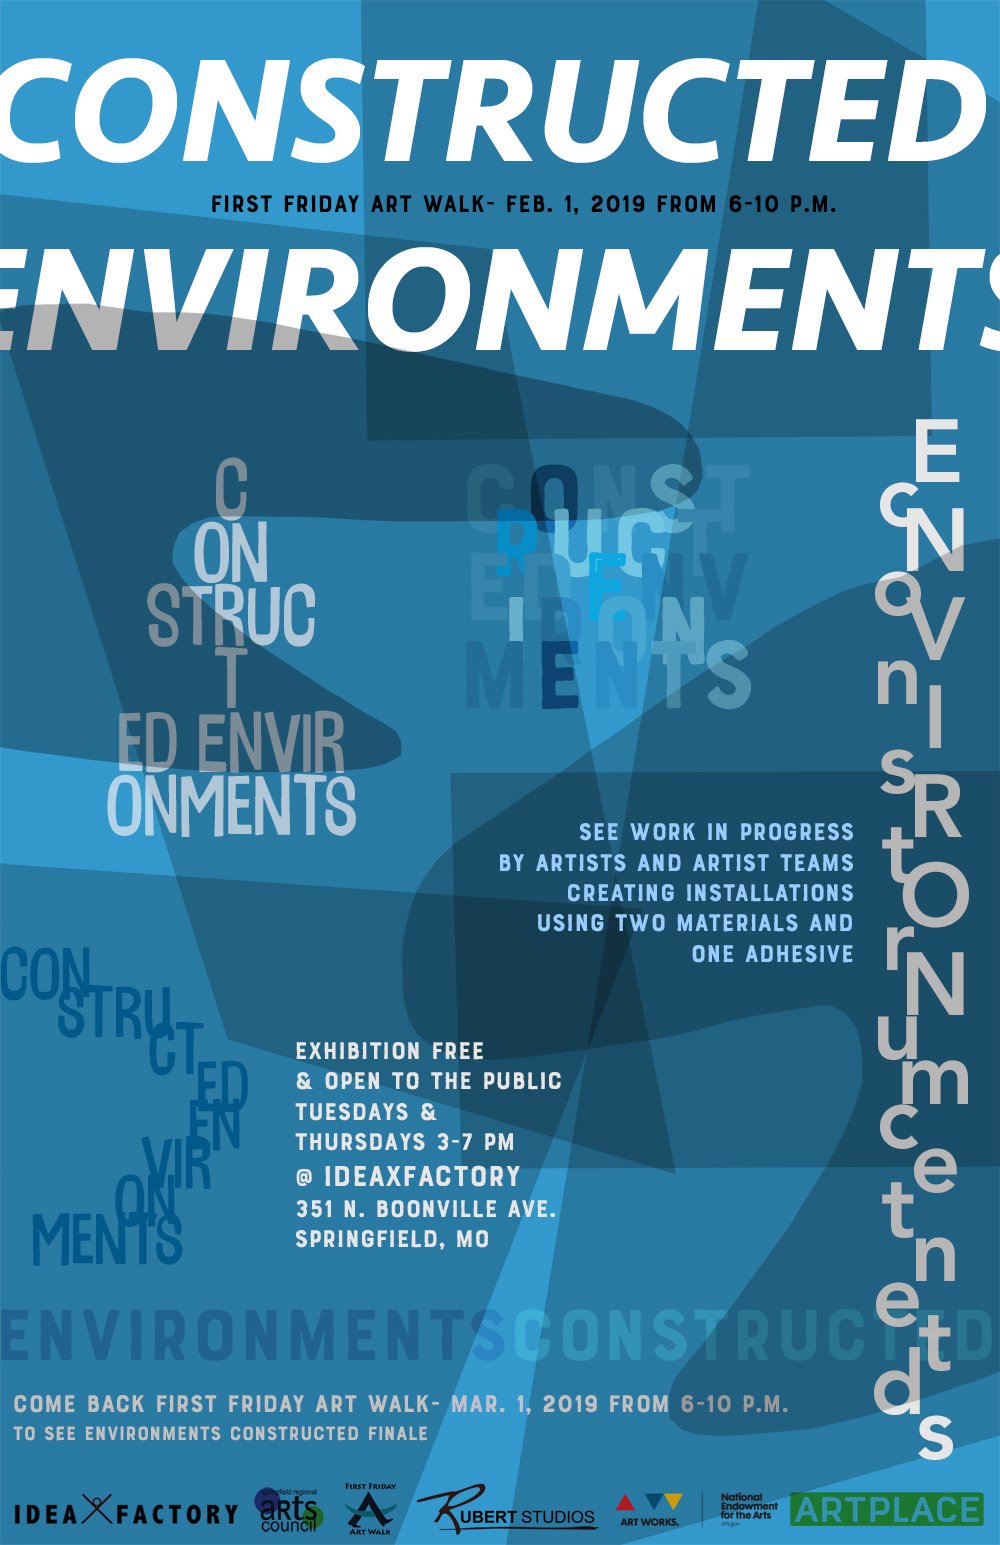 Constructed Environments First Friday Reception on Feb. 1